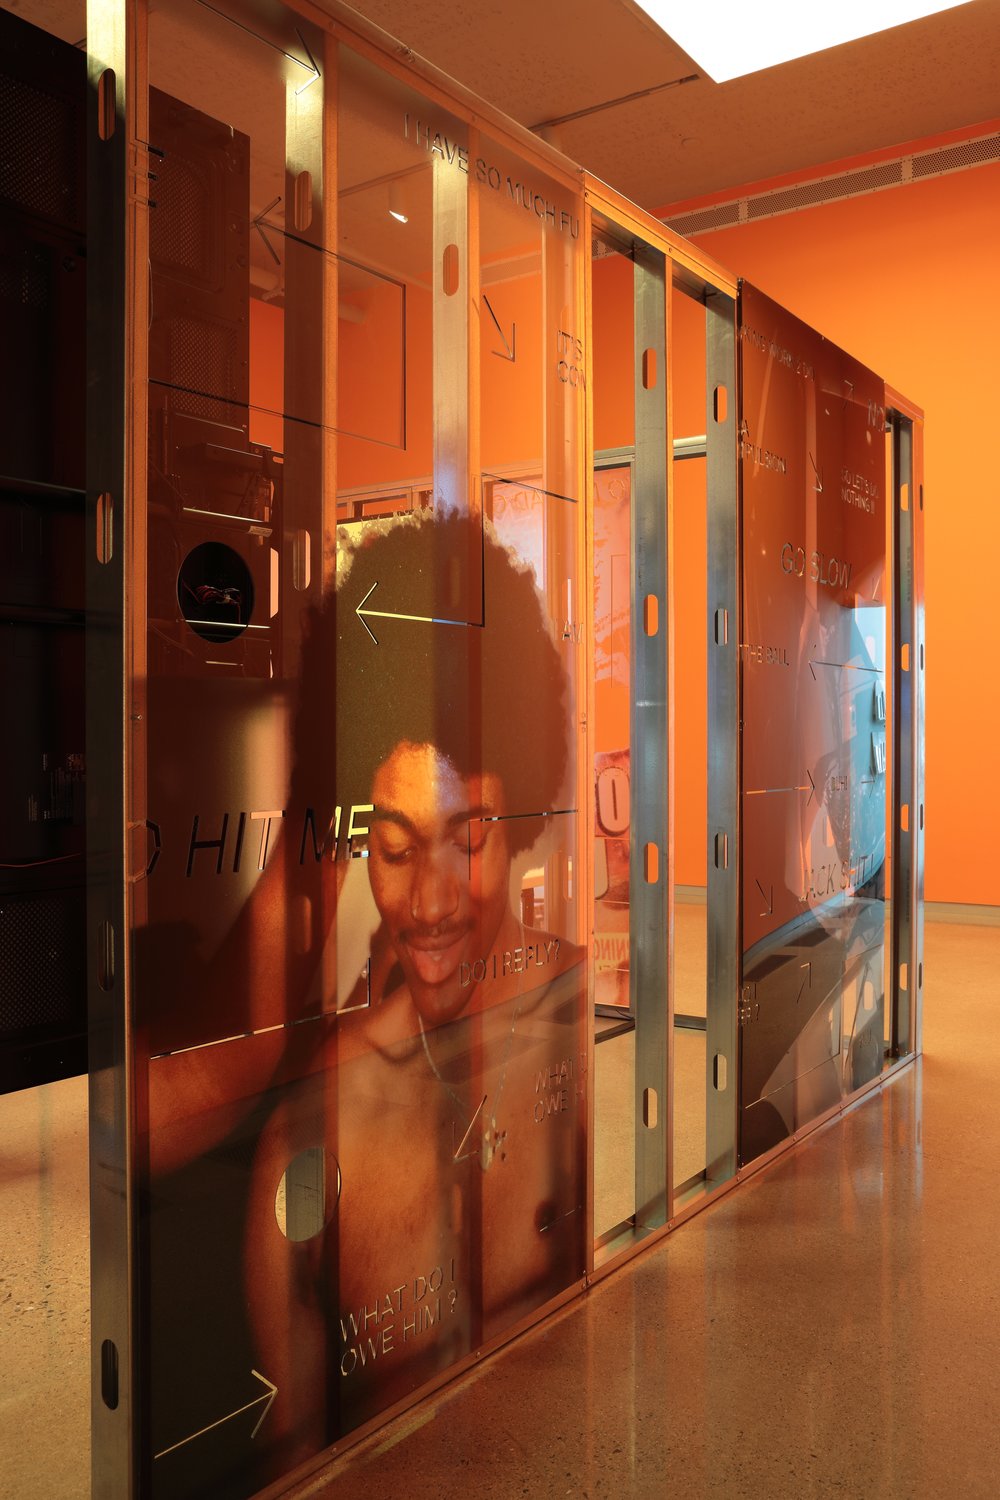   Martine Syms ,  Shame Space , 2019, Dialogues: Irena Haiduk and Martine Syms, Institute for Contemporary Art at Virginia Commonwealth University, Richmond, Virginia, 2019  Interactive video installation including photographic-printed acrylic with C